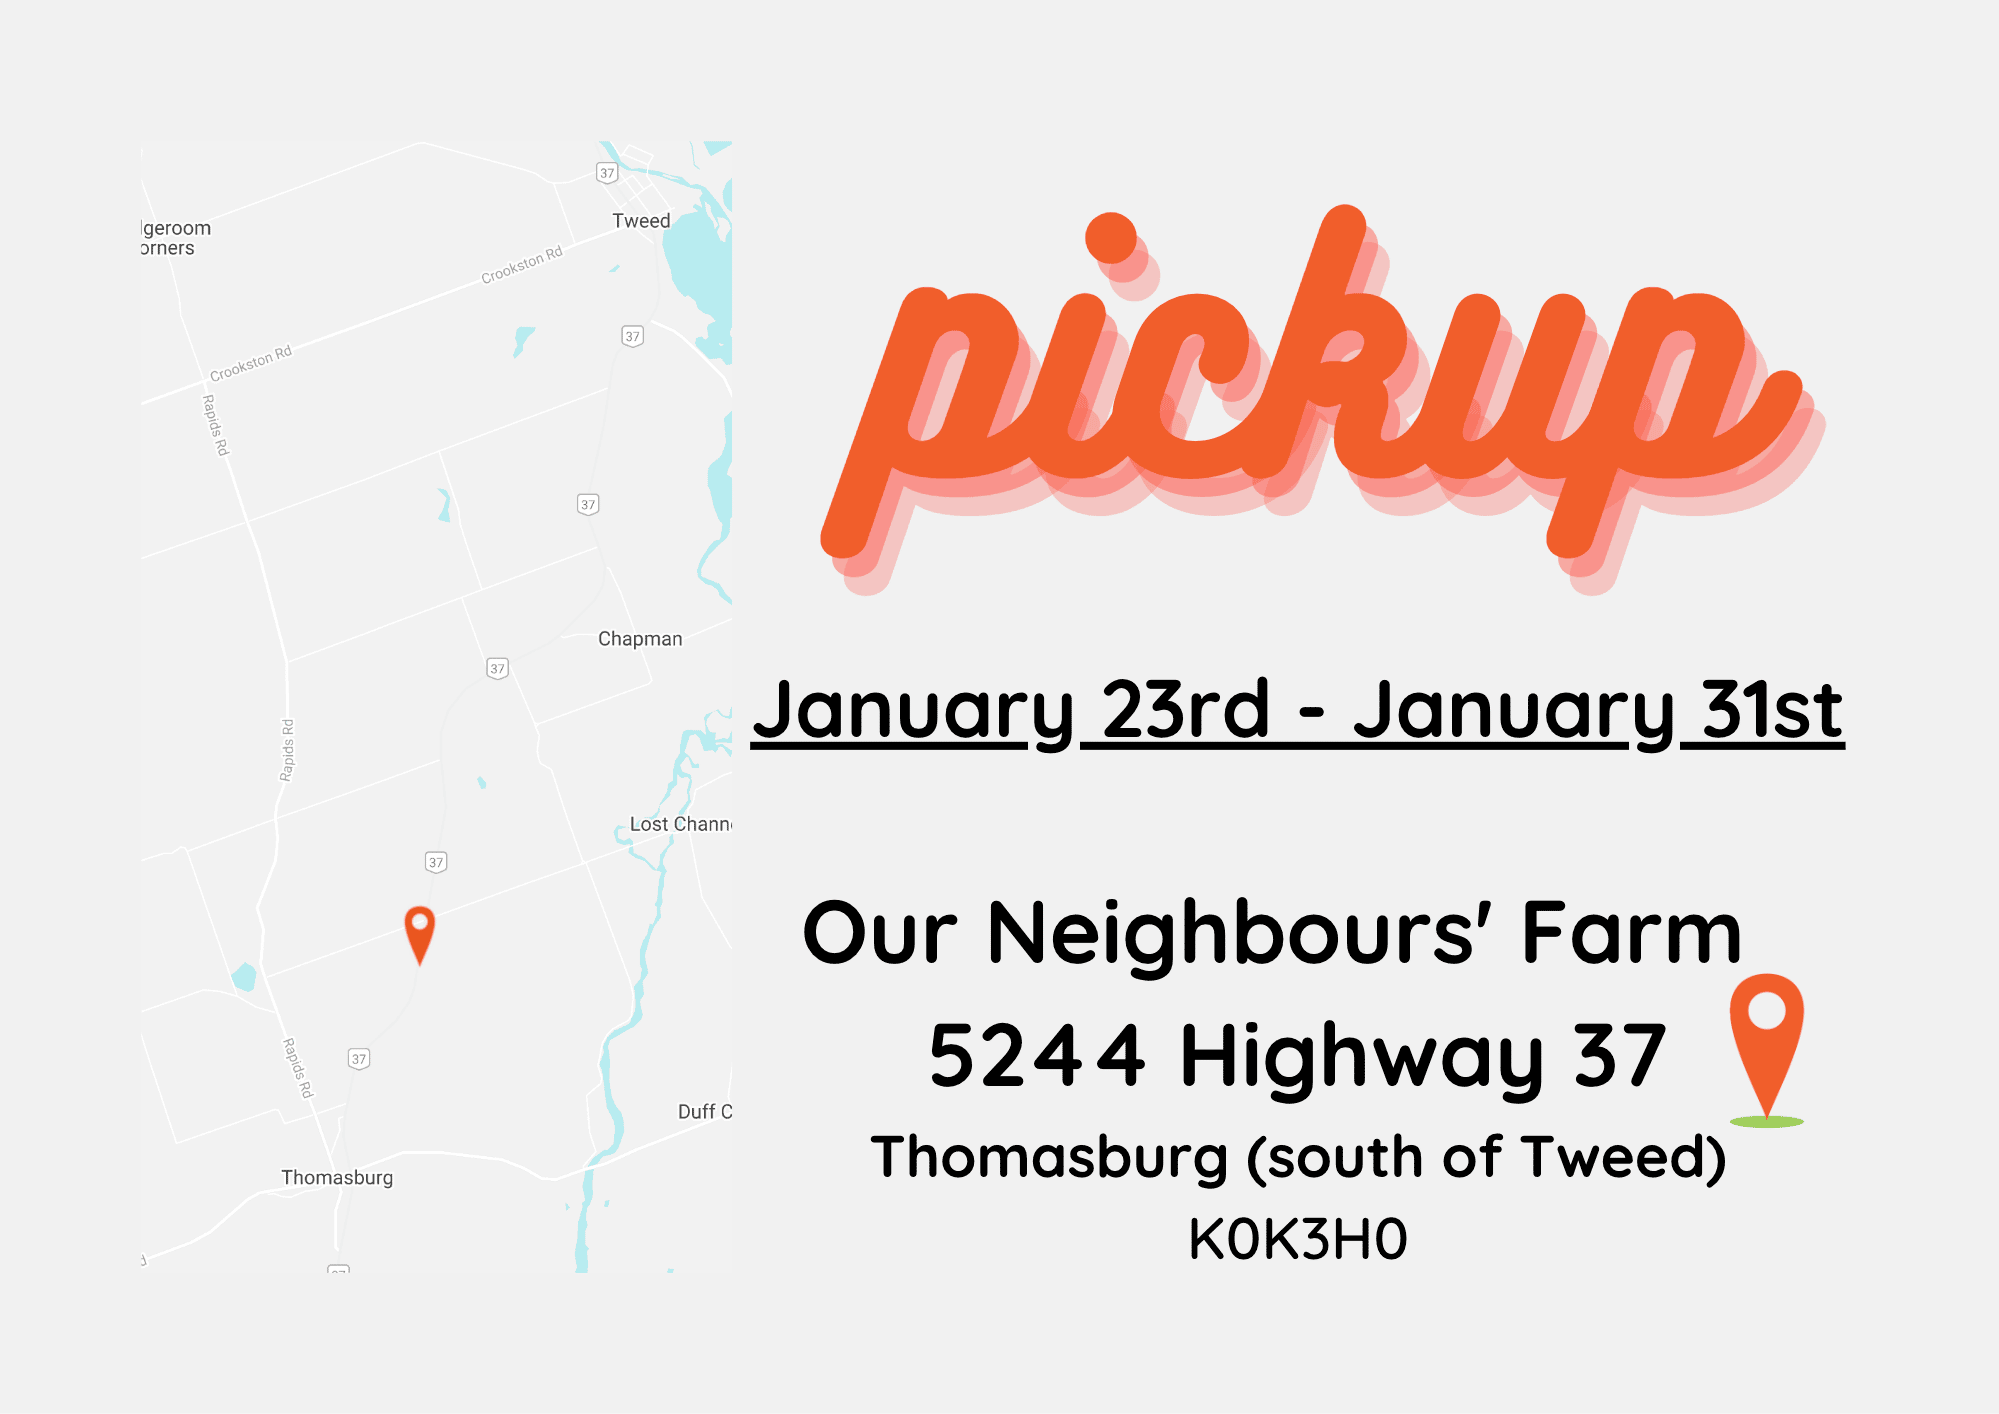 Pickup dates and location